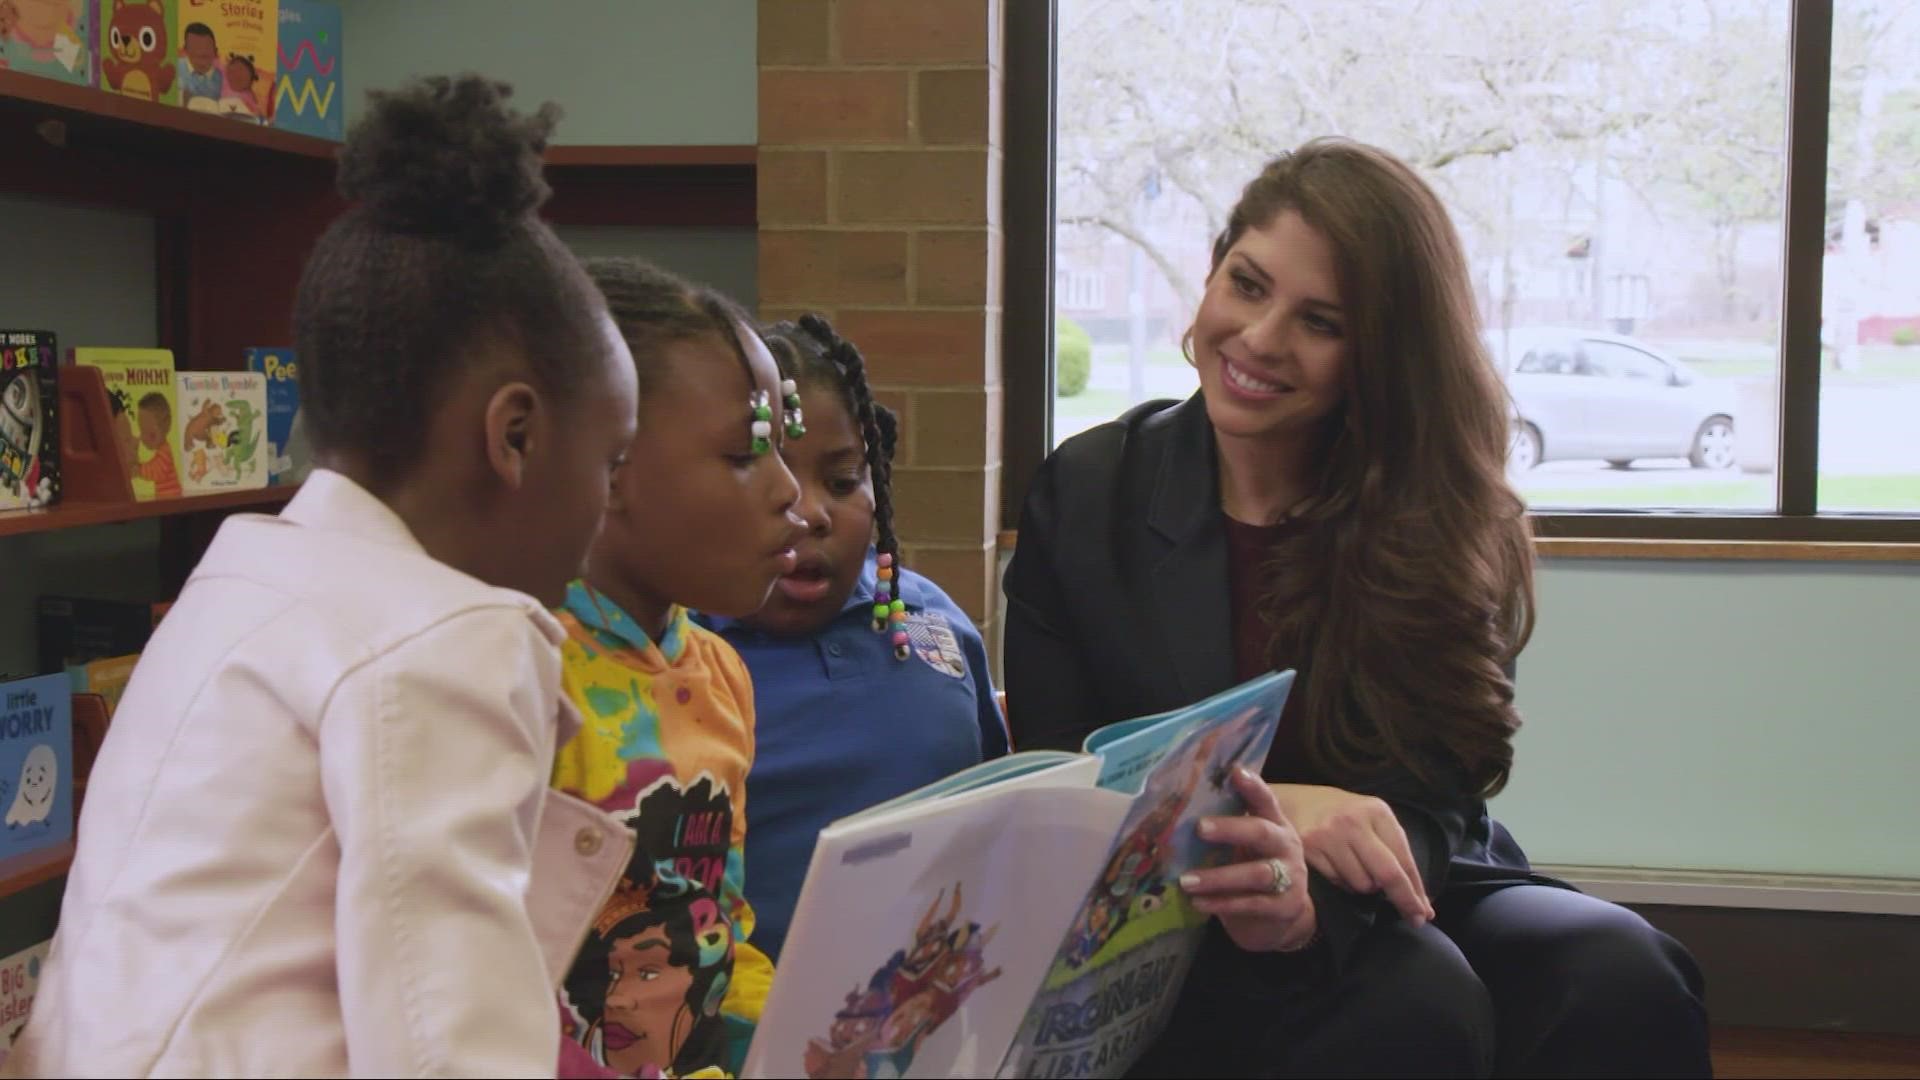 3News anchor Laura Caso visited Cleveland Public Library's Fleet branch to read stories and fell in love with her reading buddies